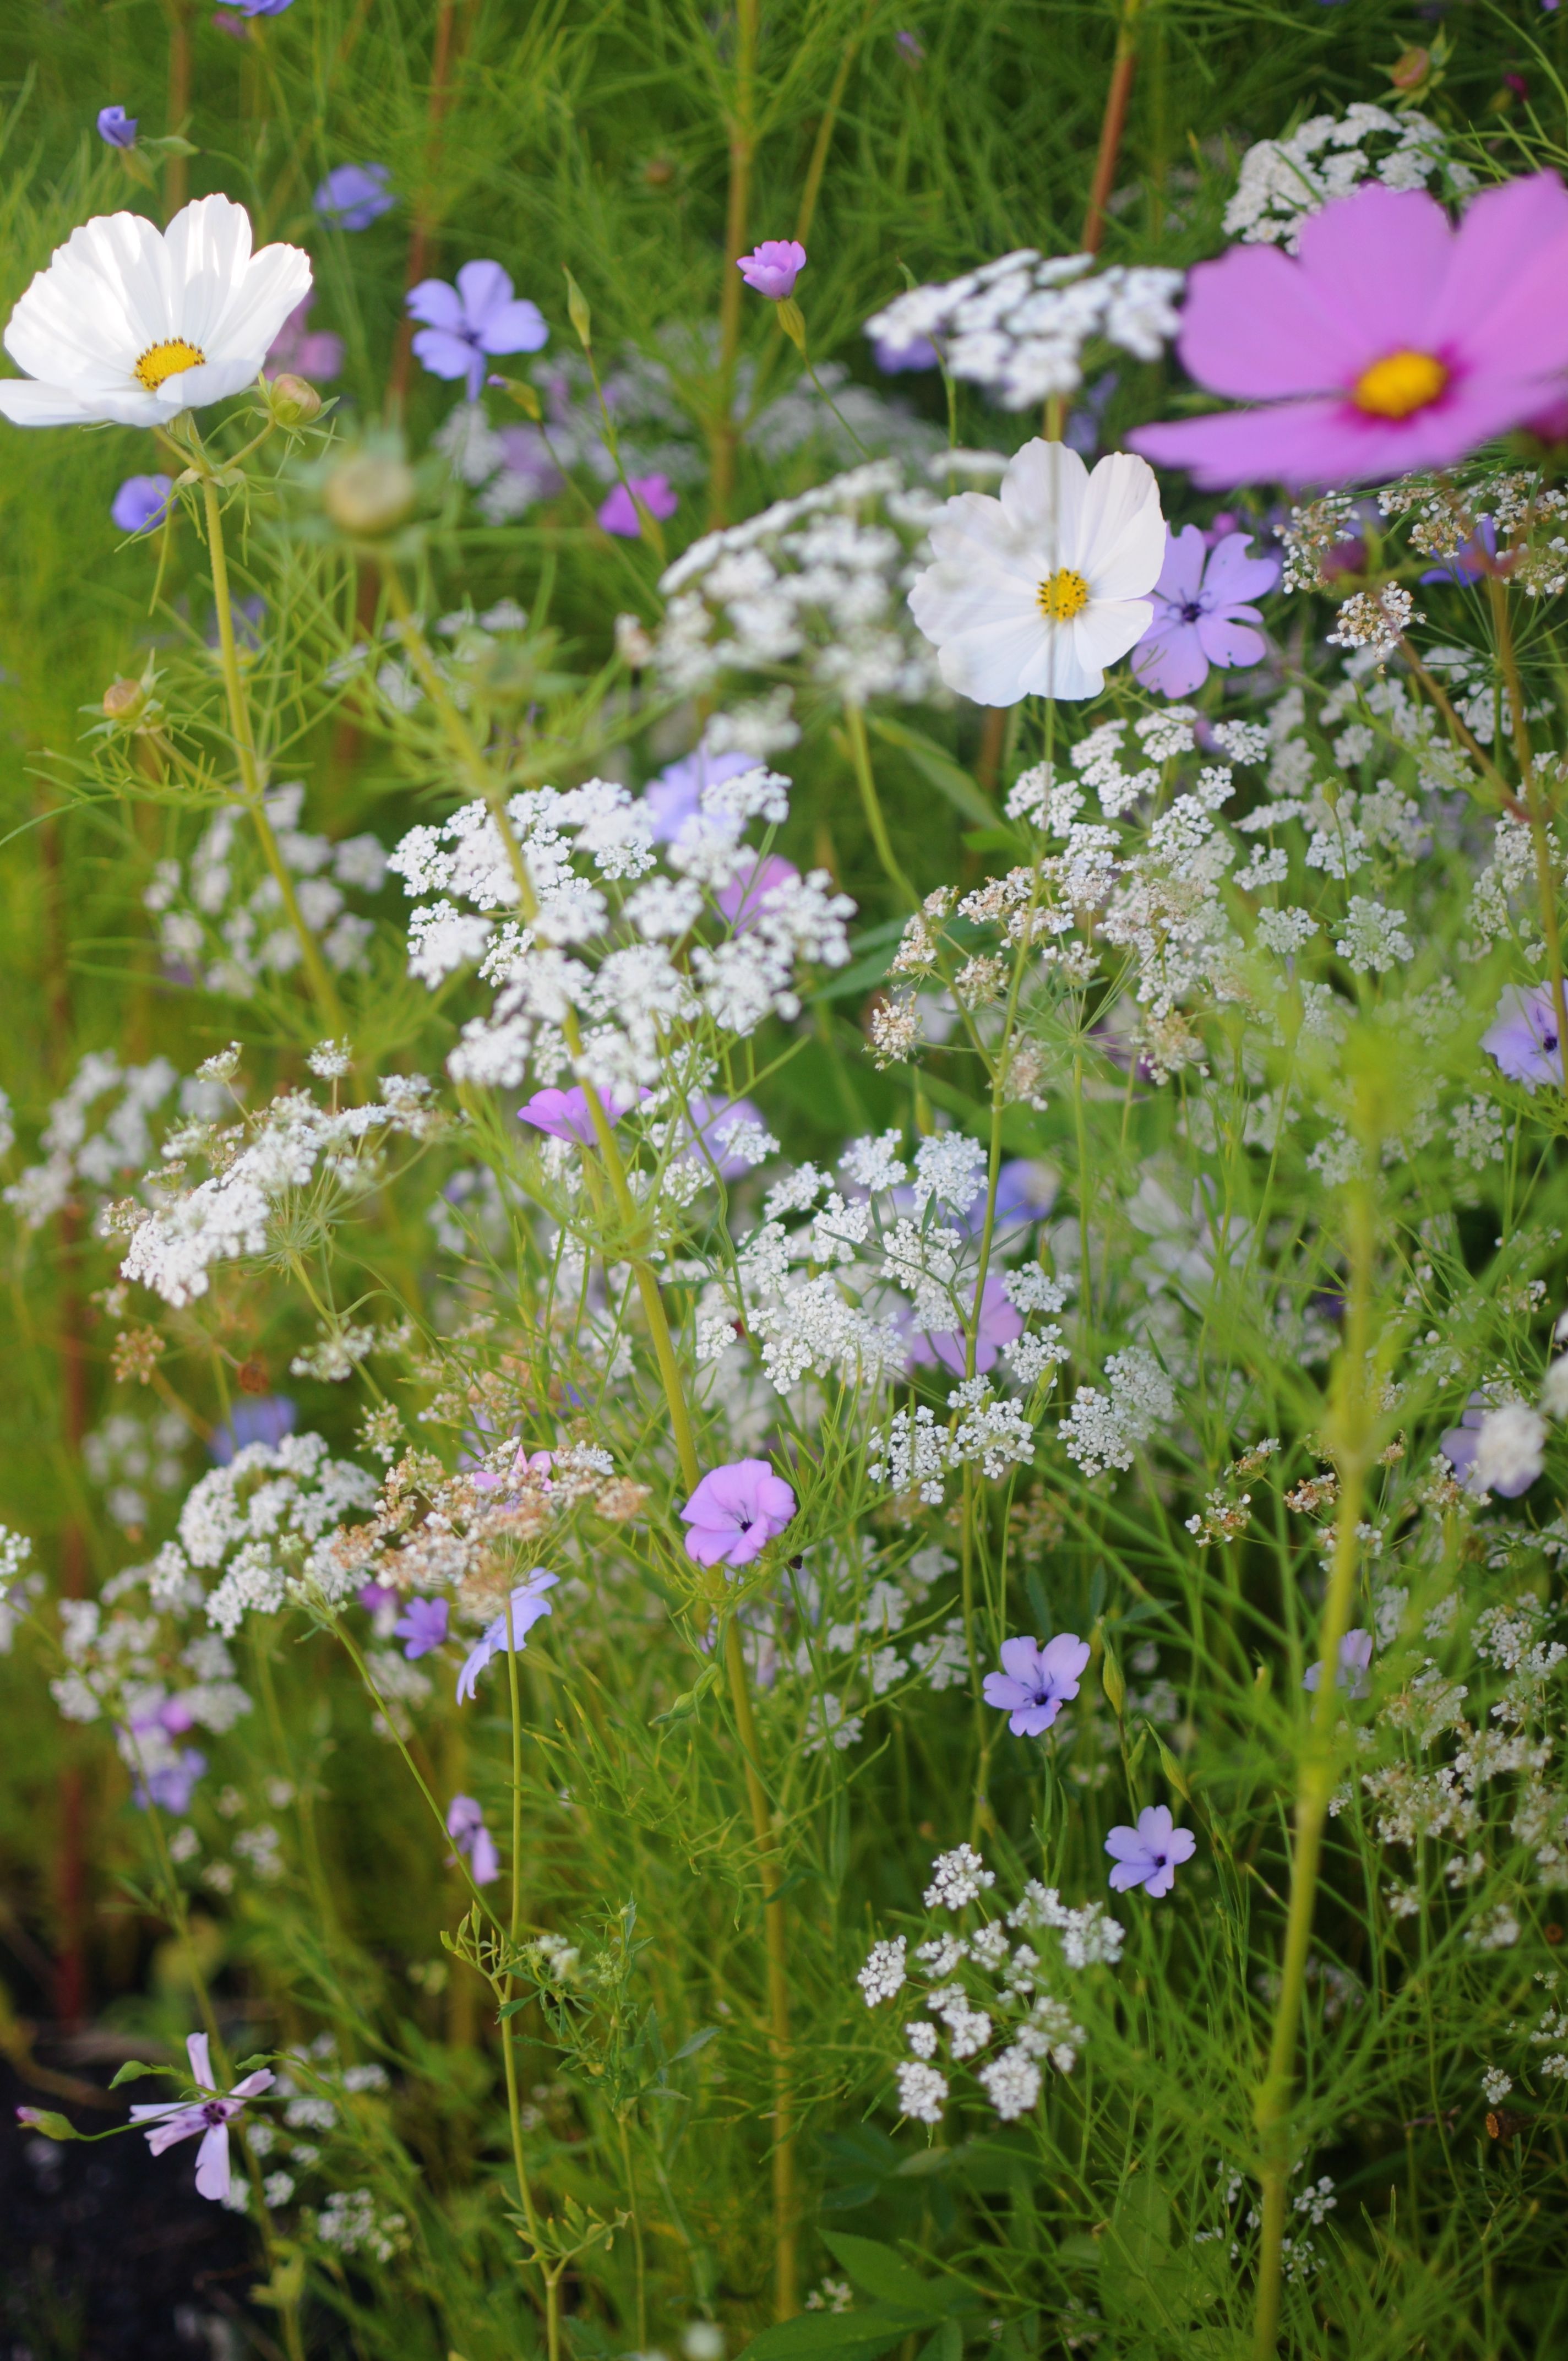 Wildflowers: Cosmos, Queen Annes lace and corn cockle.